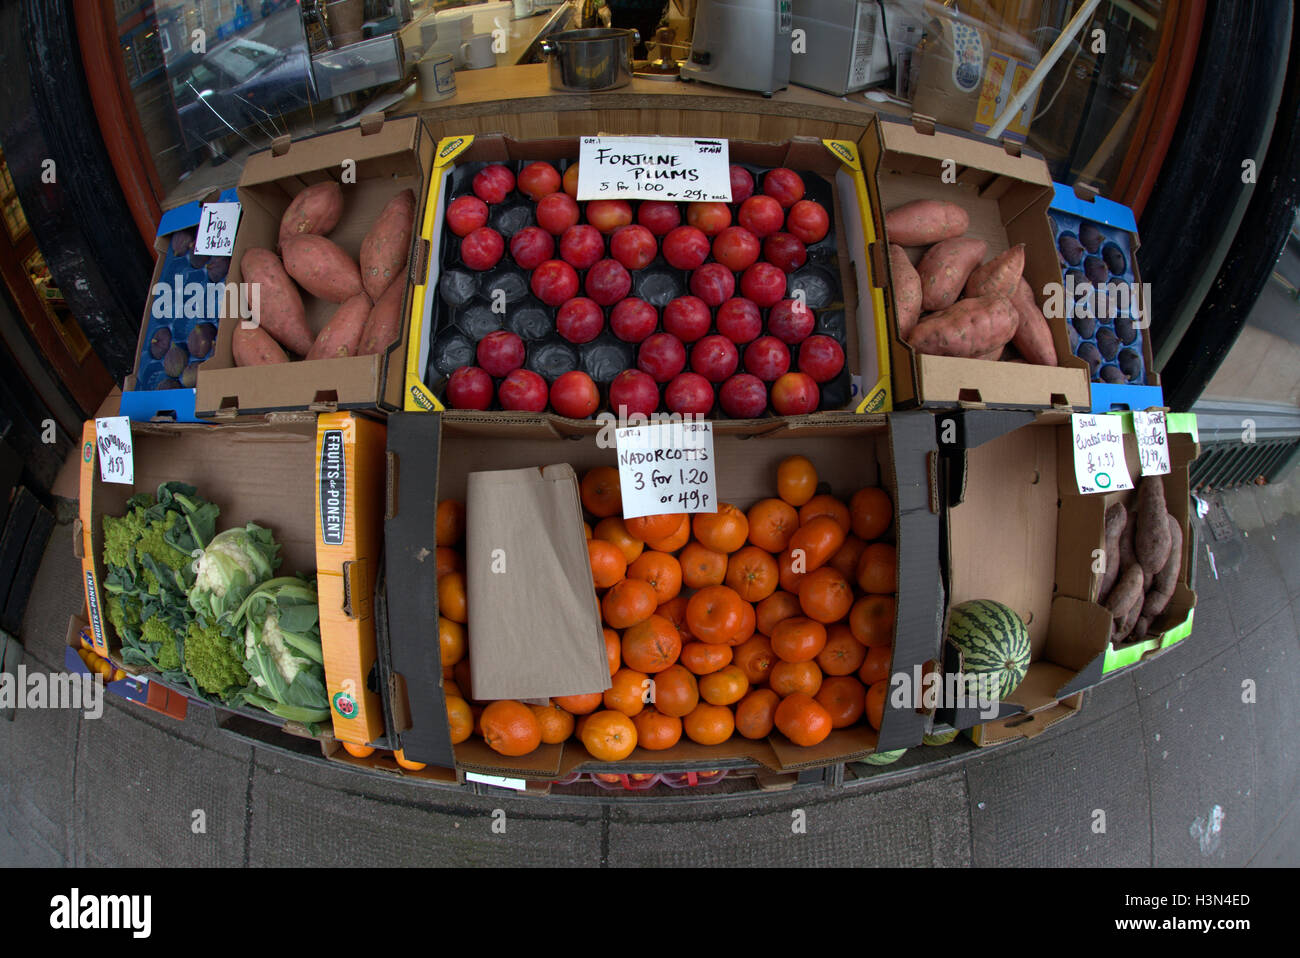 fruit and vegetable shop stall display with boxes from above fisheye Stock Photo